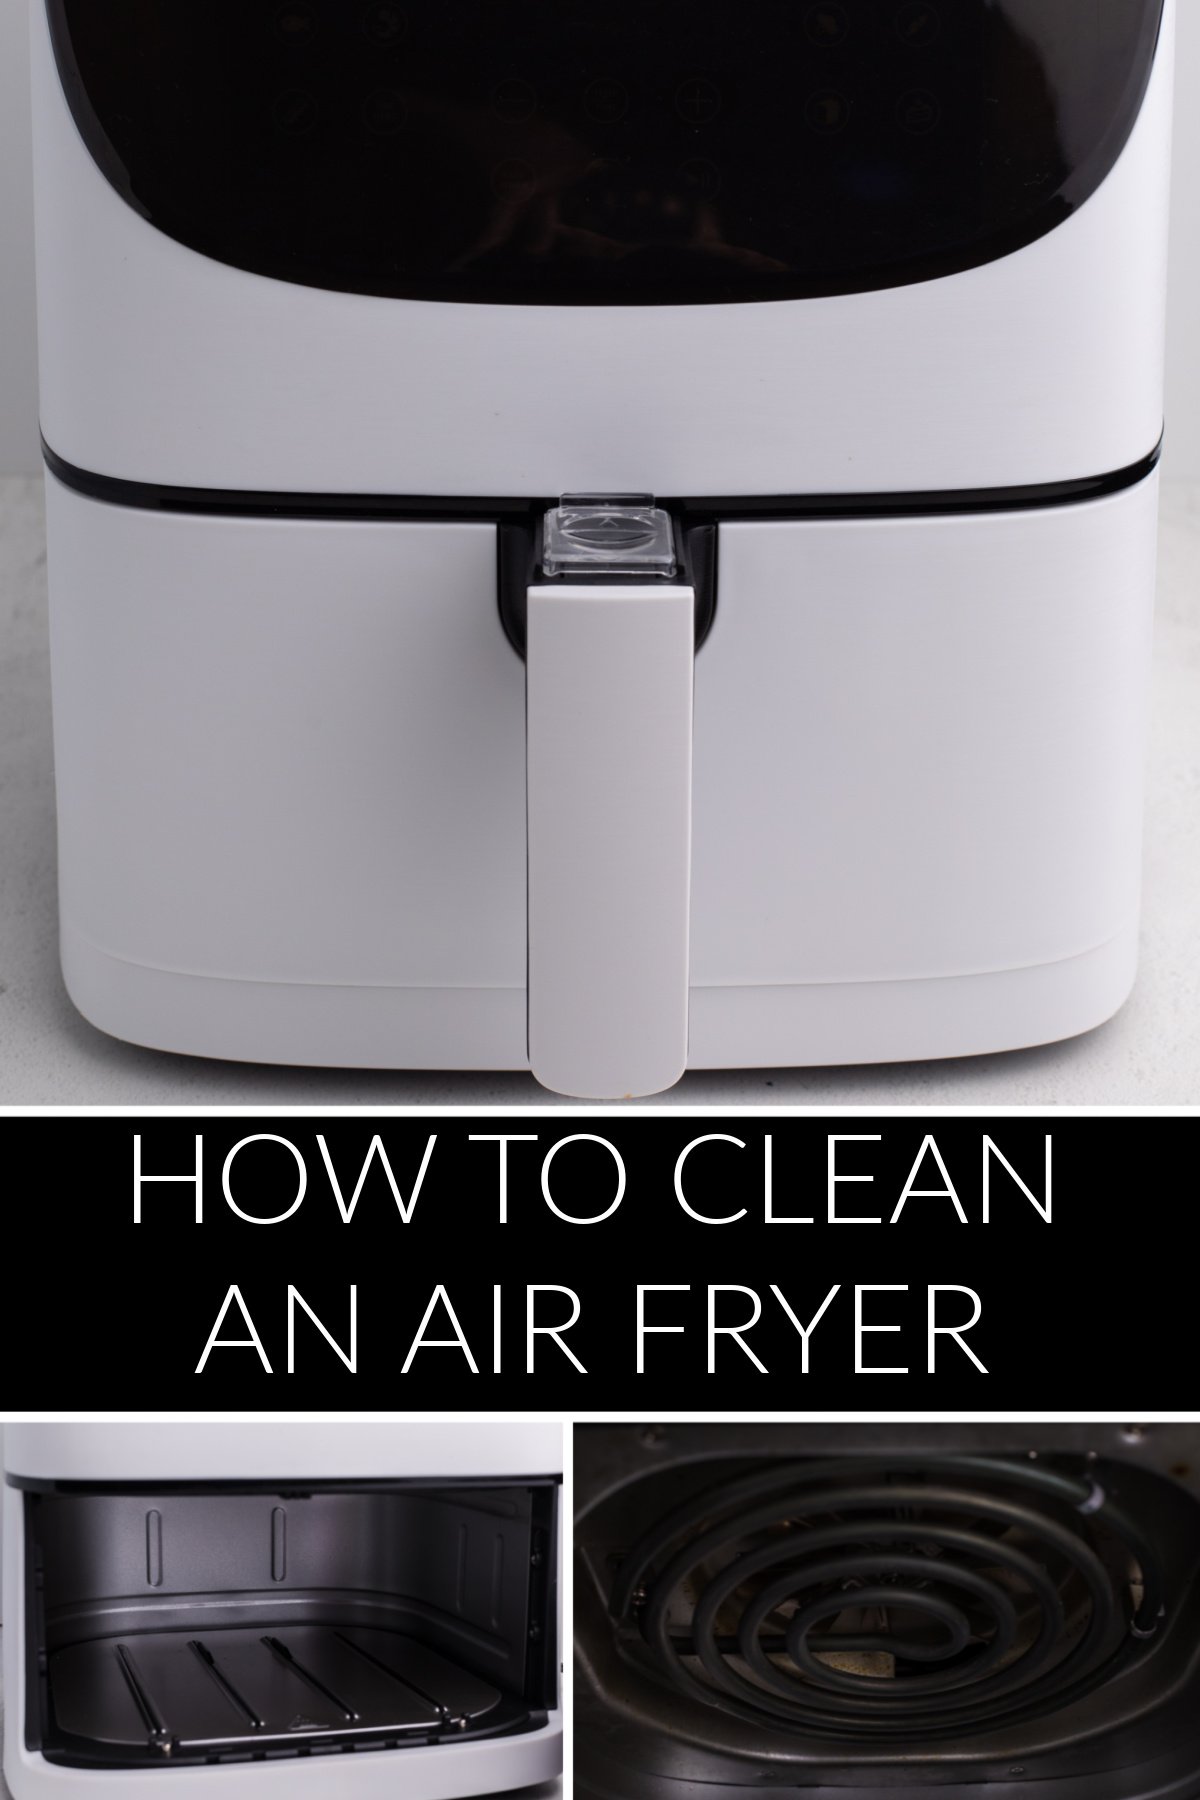 Picture collage of an air fryer, the inside of an air fryer, and the air fryer heating element. 